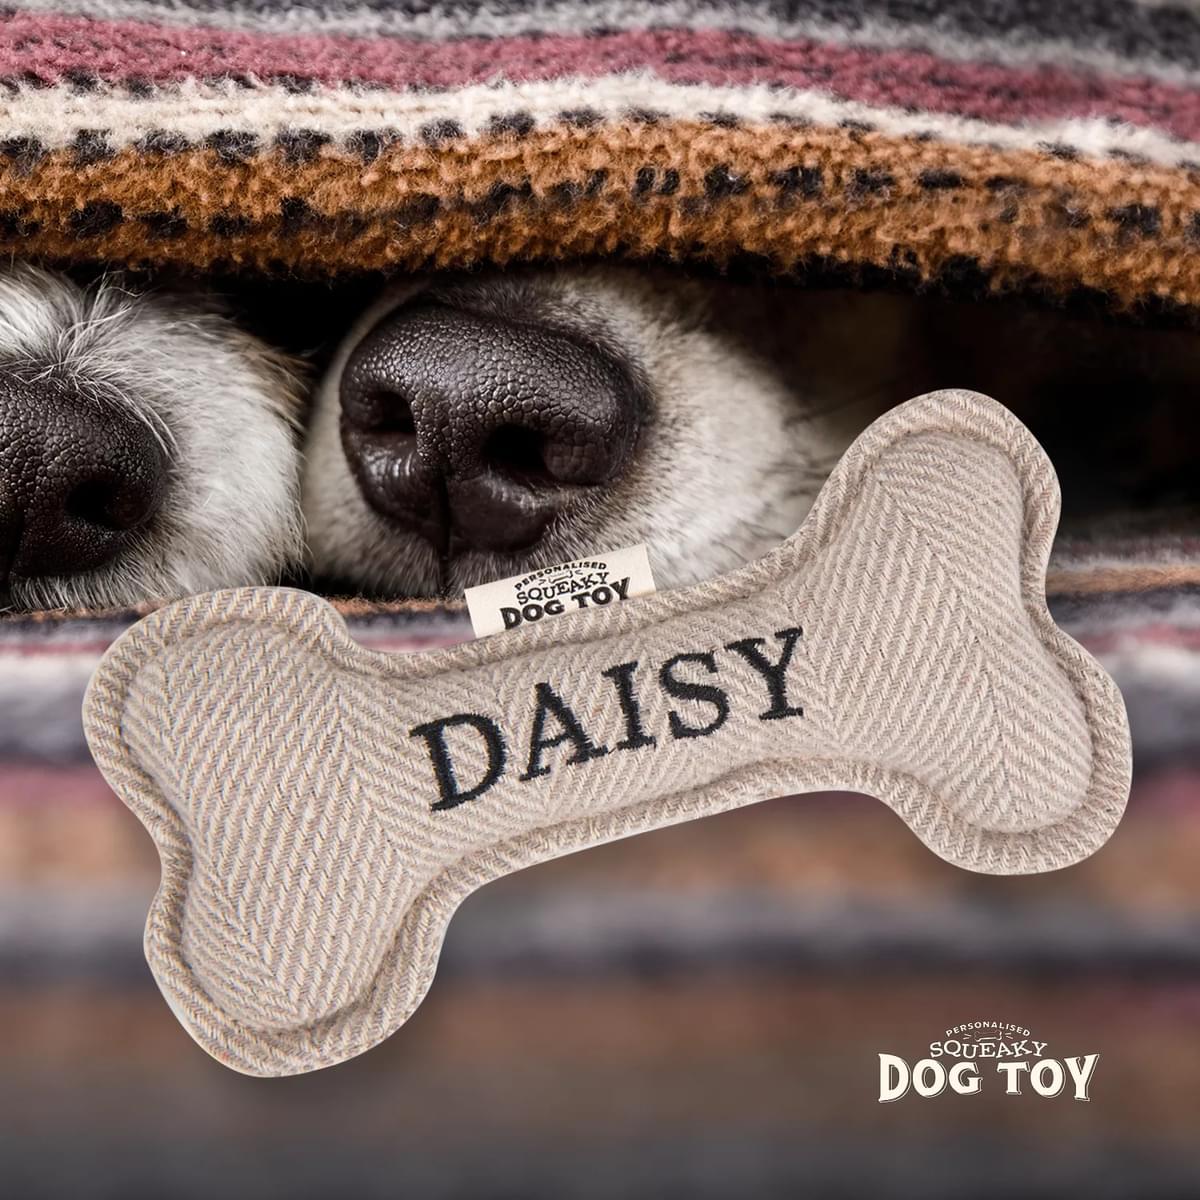 Squeaky Dog Toy - Dog Names